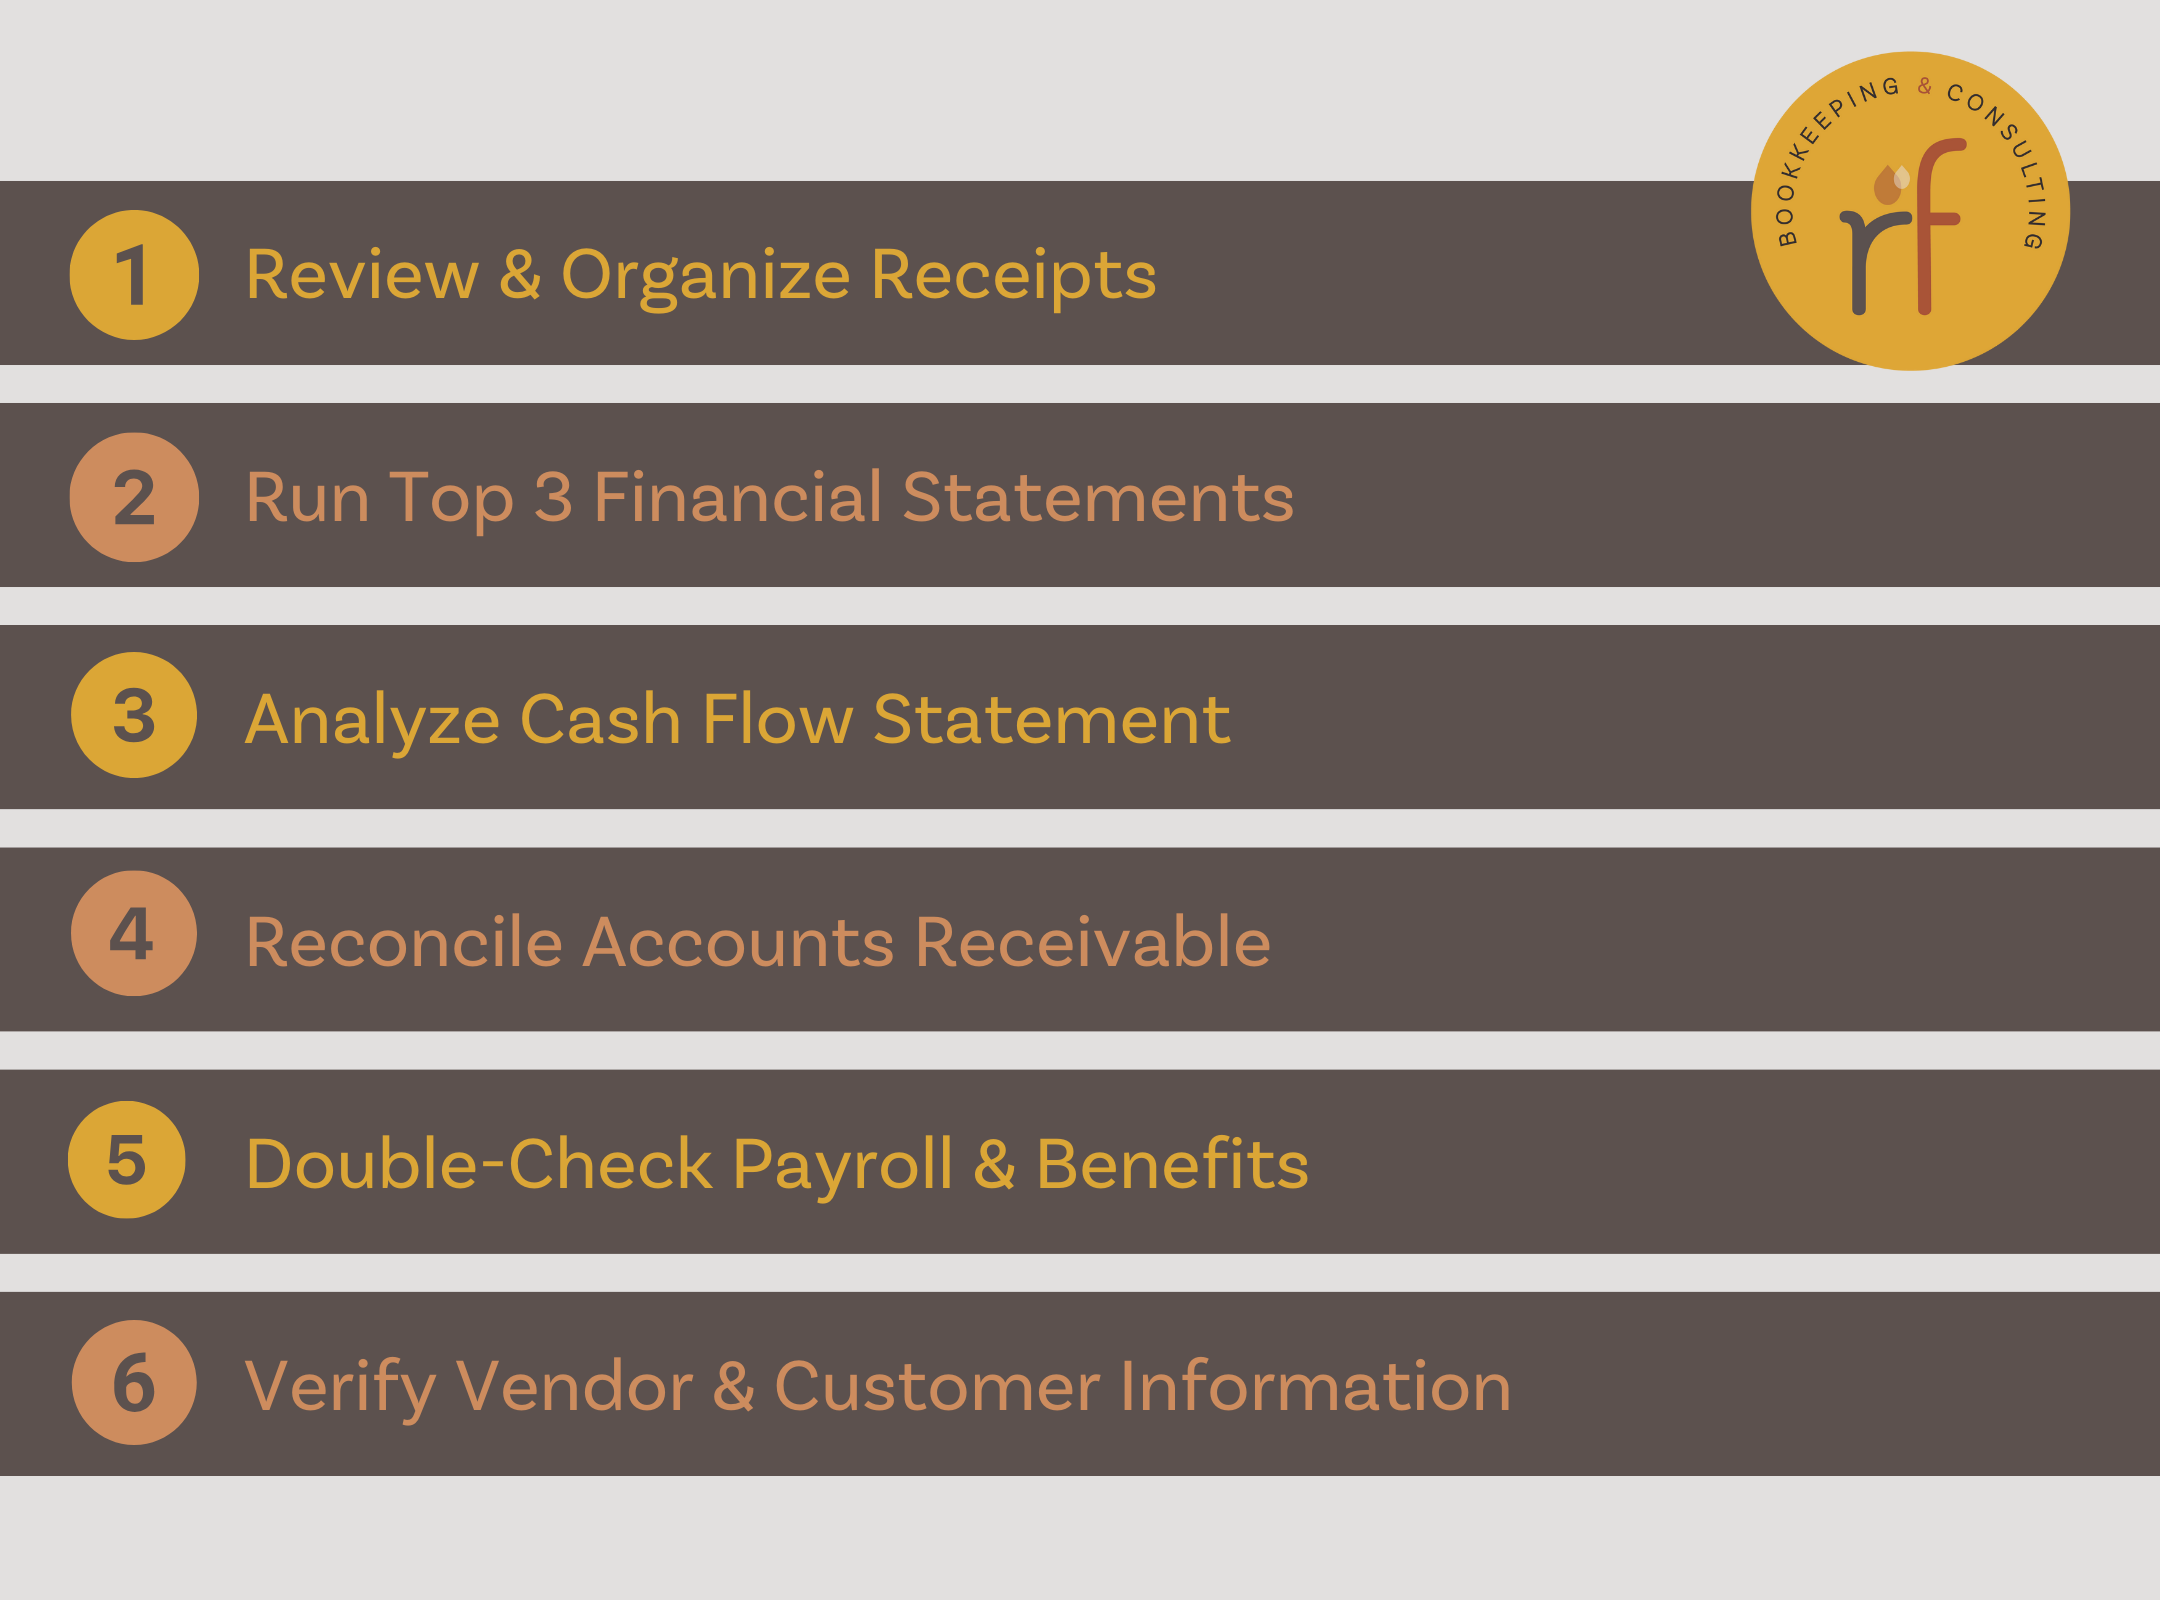 Year End accounting checklist: receipts, financial statements, cash flow analysis, accounts receivable, payroll & benefits, and vendor and customer information.